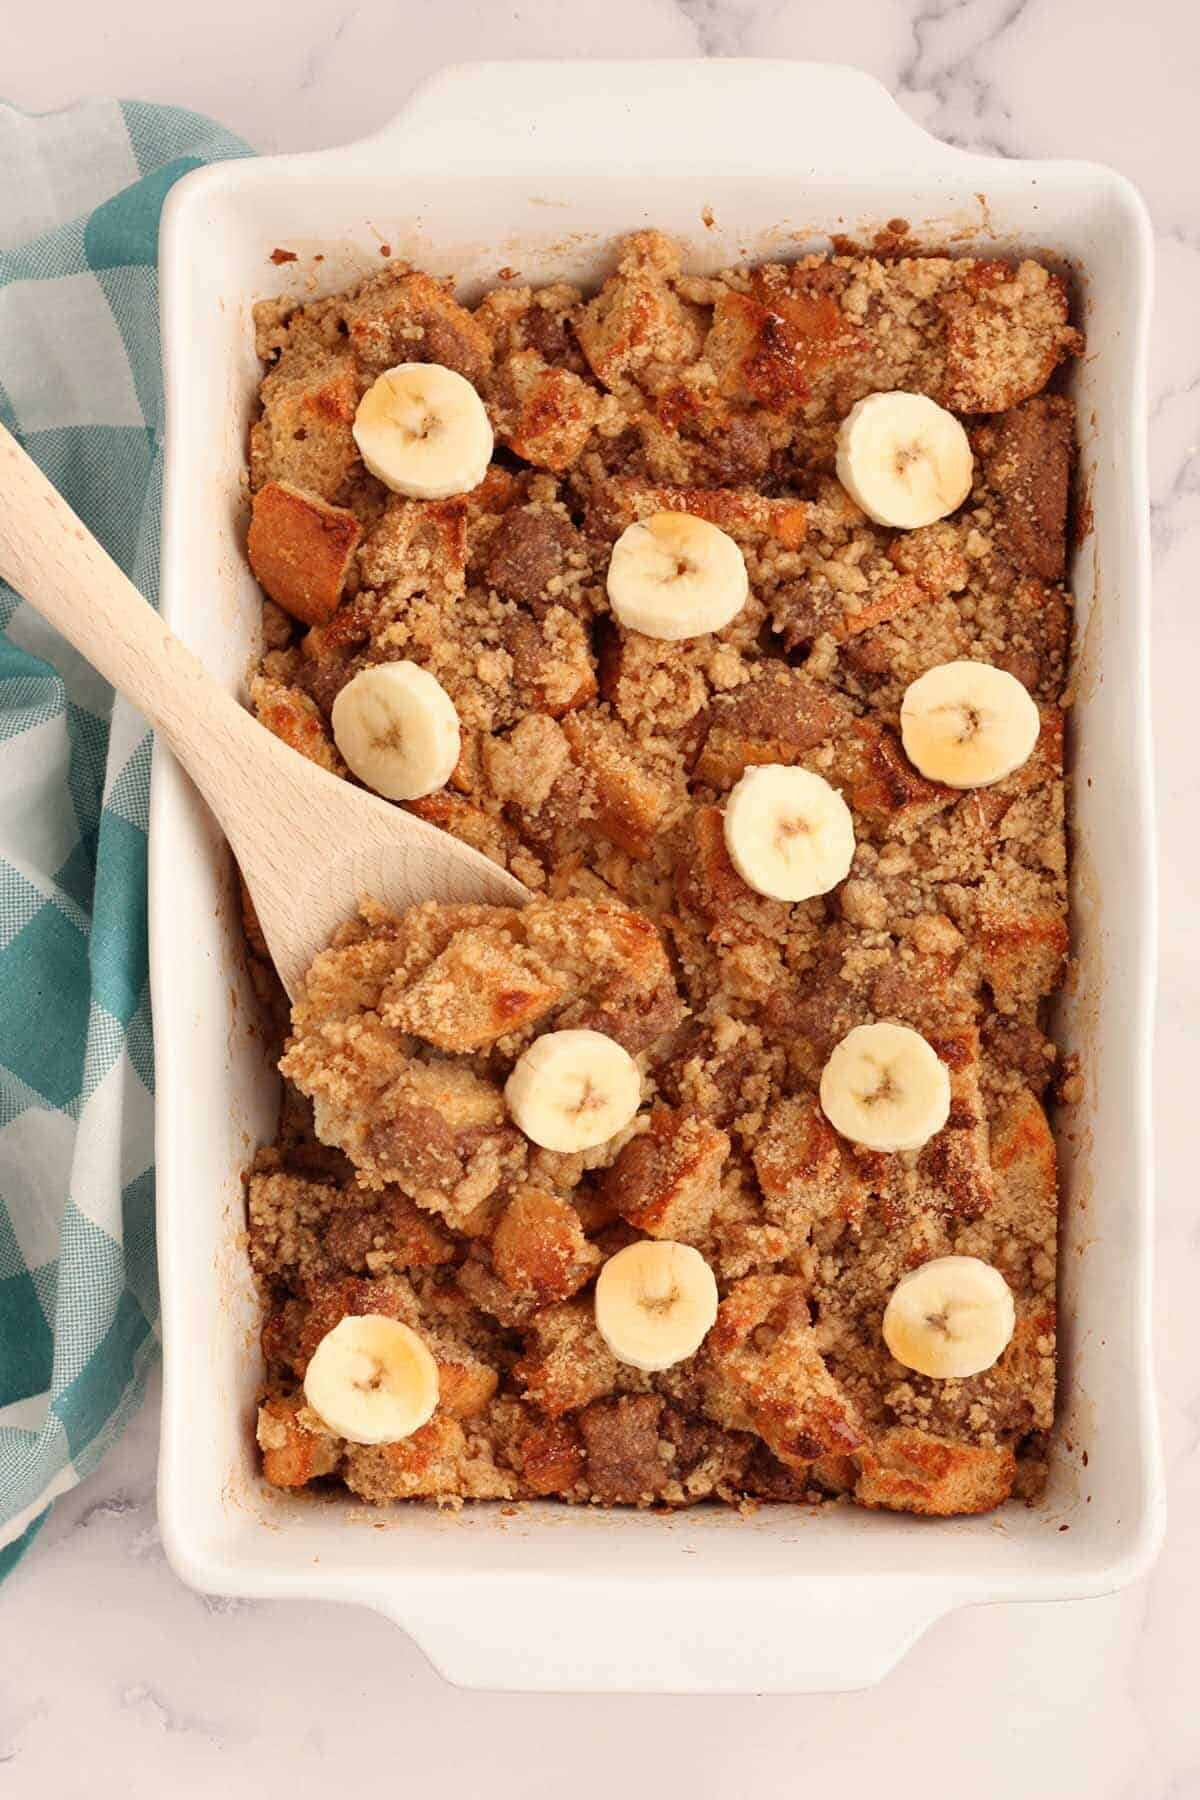 baked french toast casserole in a white baking dish